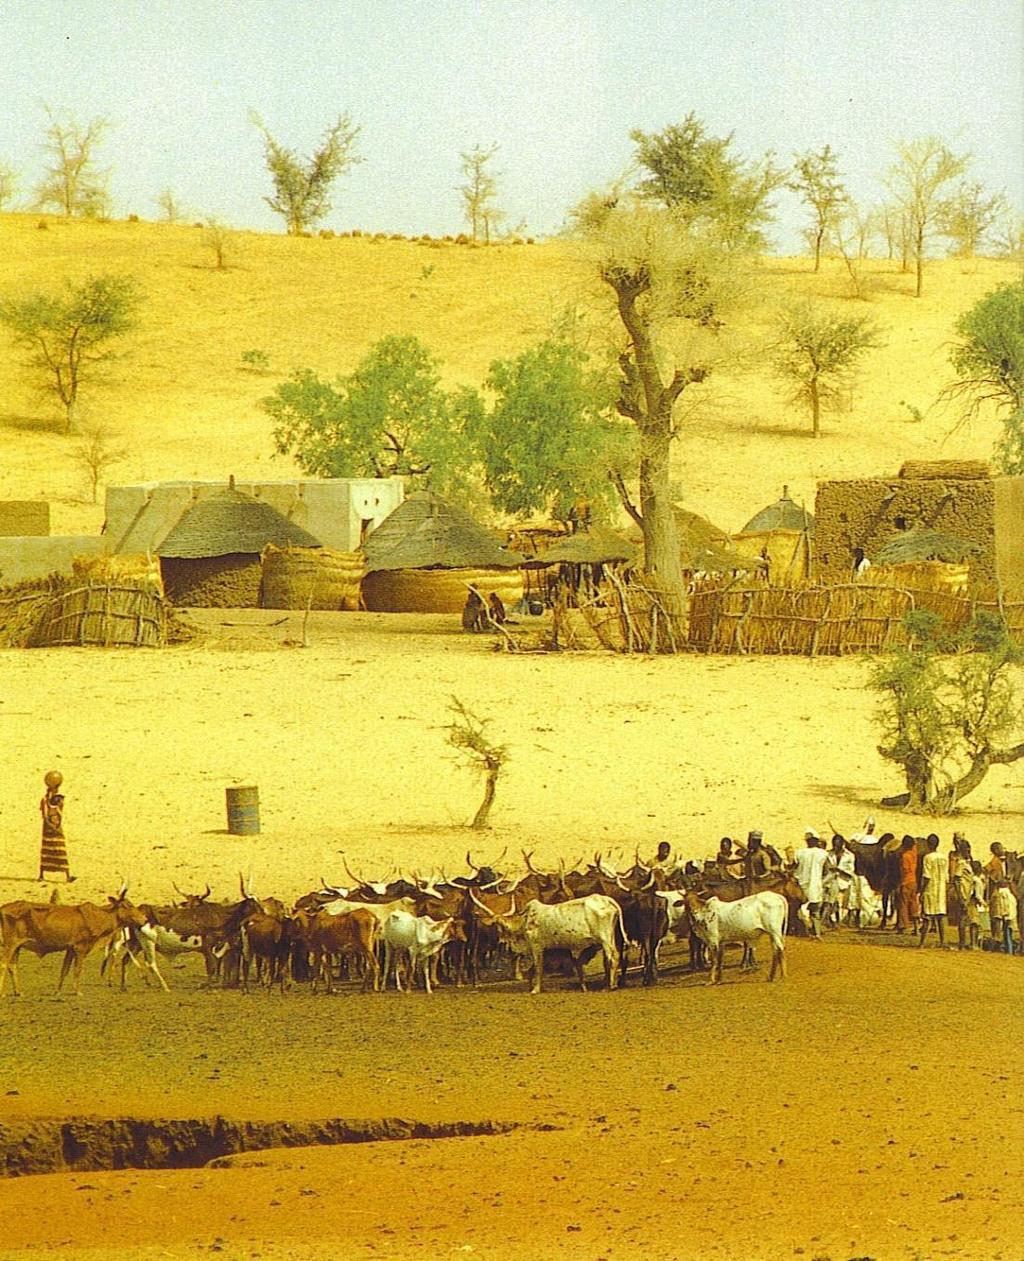 The First Agricultural Revolution-Animal Animals such as goats, pigs and sheep were domesticated about 8,000 yrs. ago.